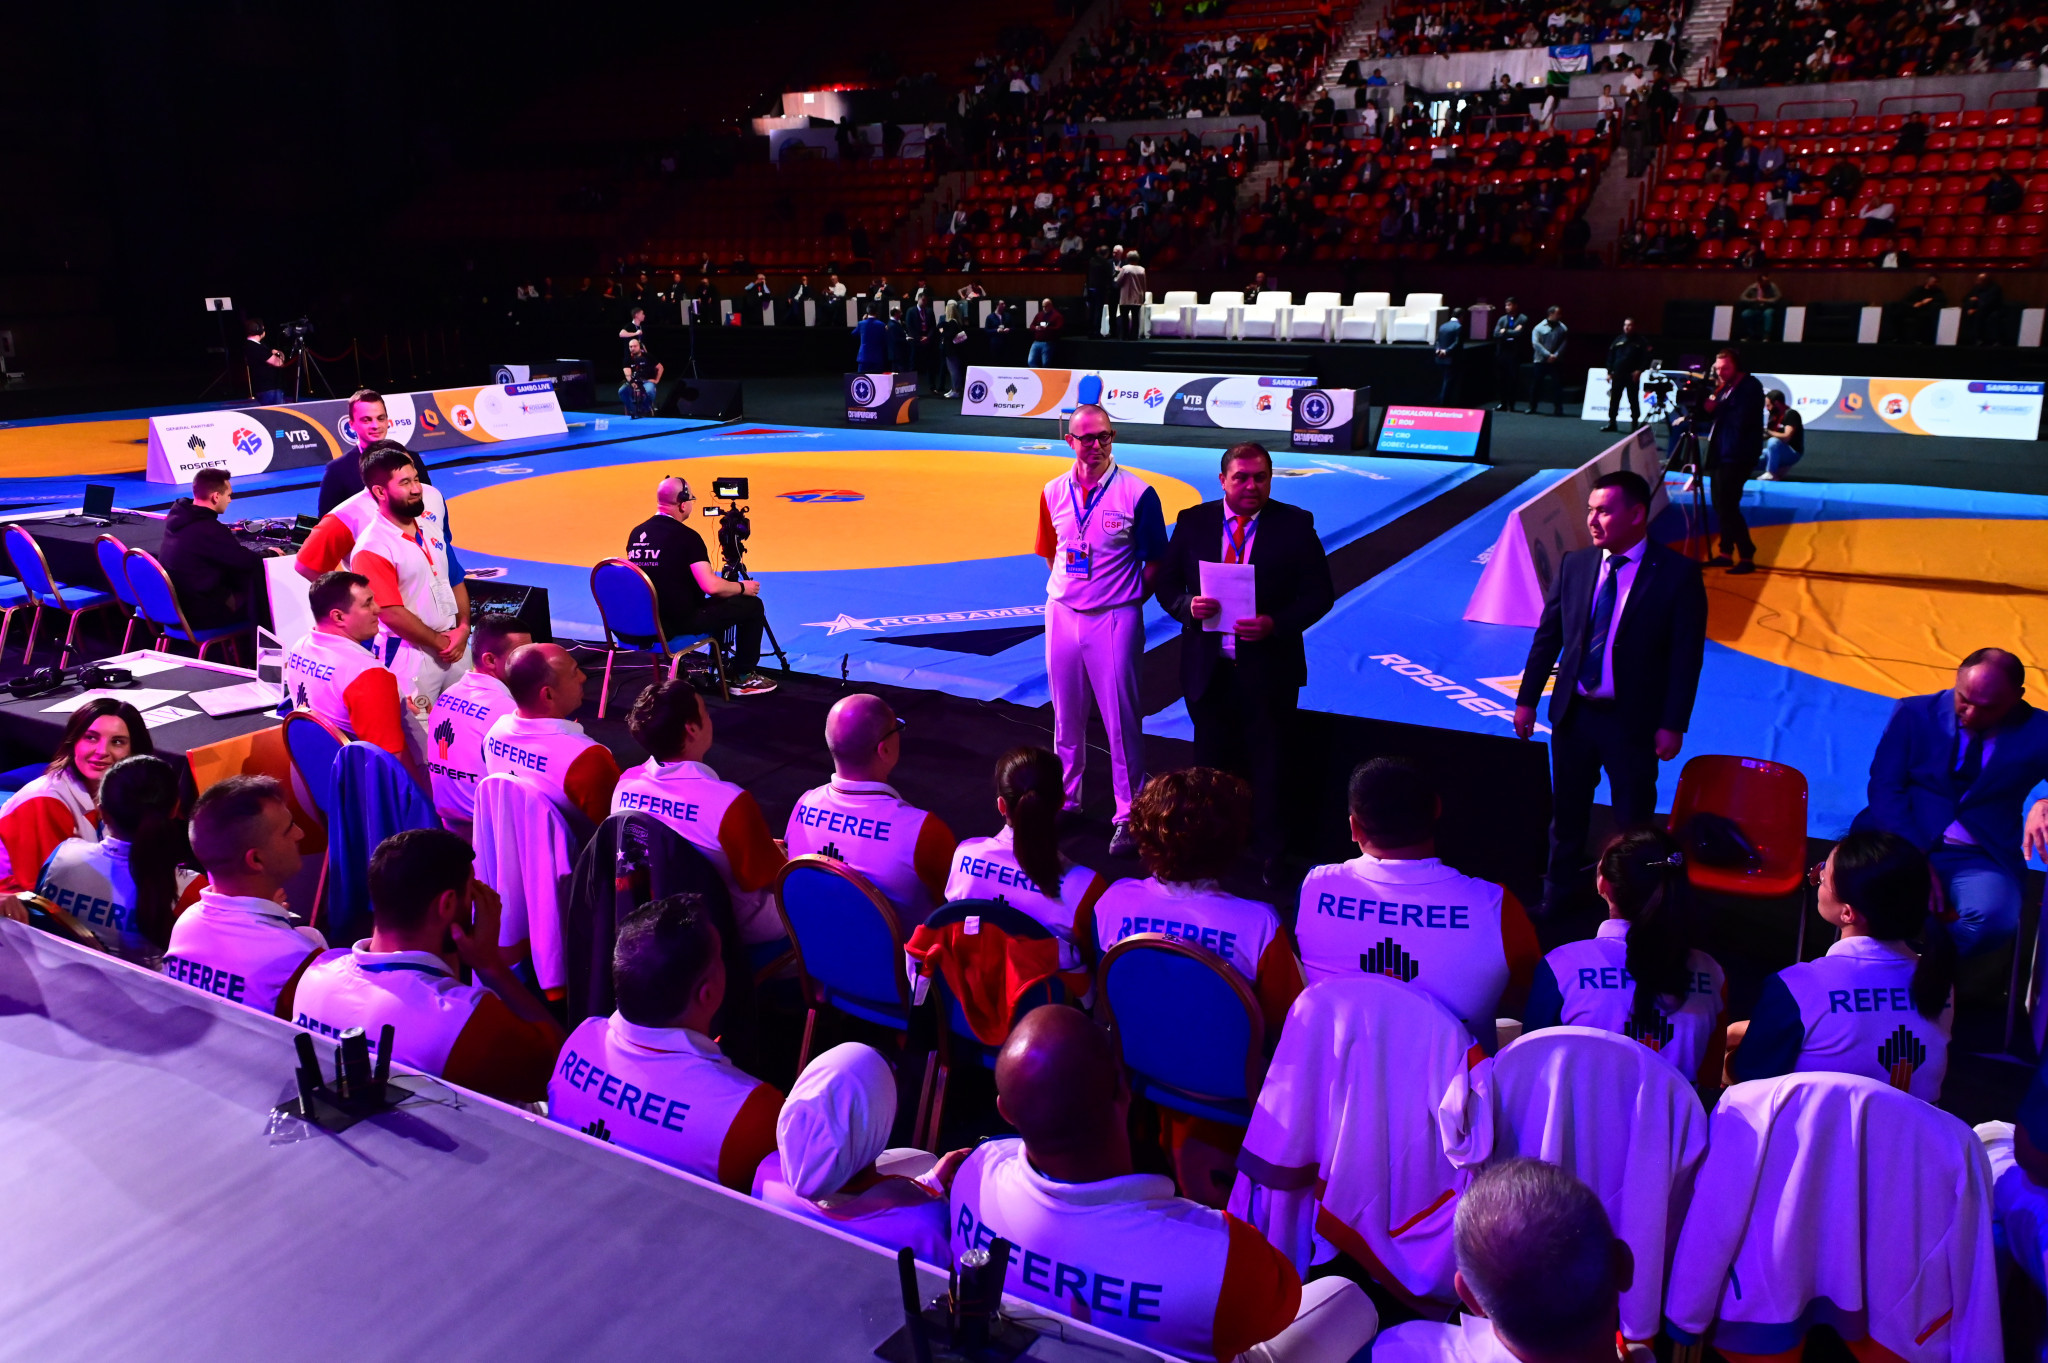 The largest world championship in sambo's history is over, but even more yet to come for Yerevan © FIAS